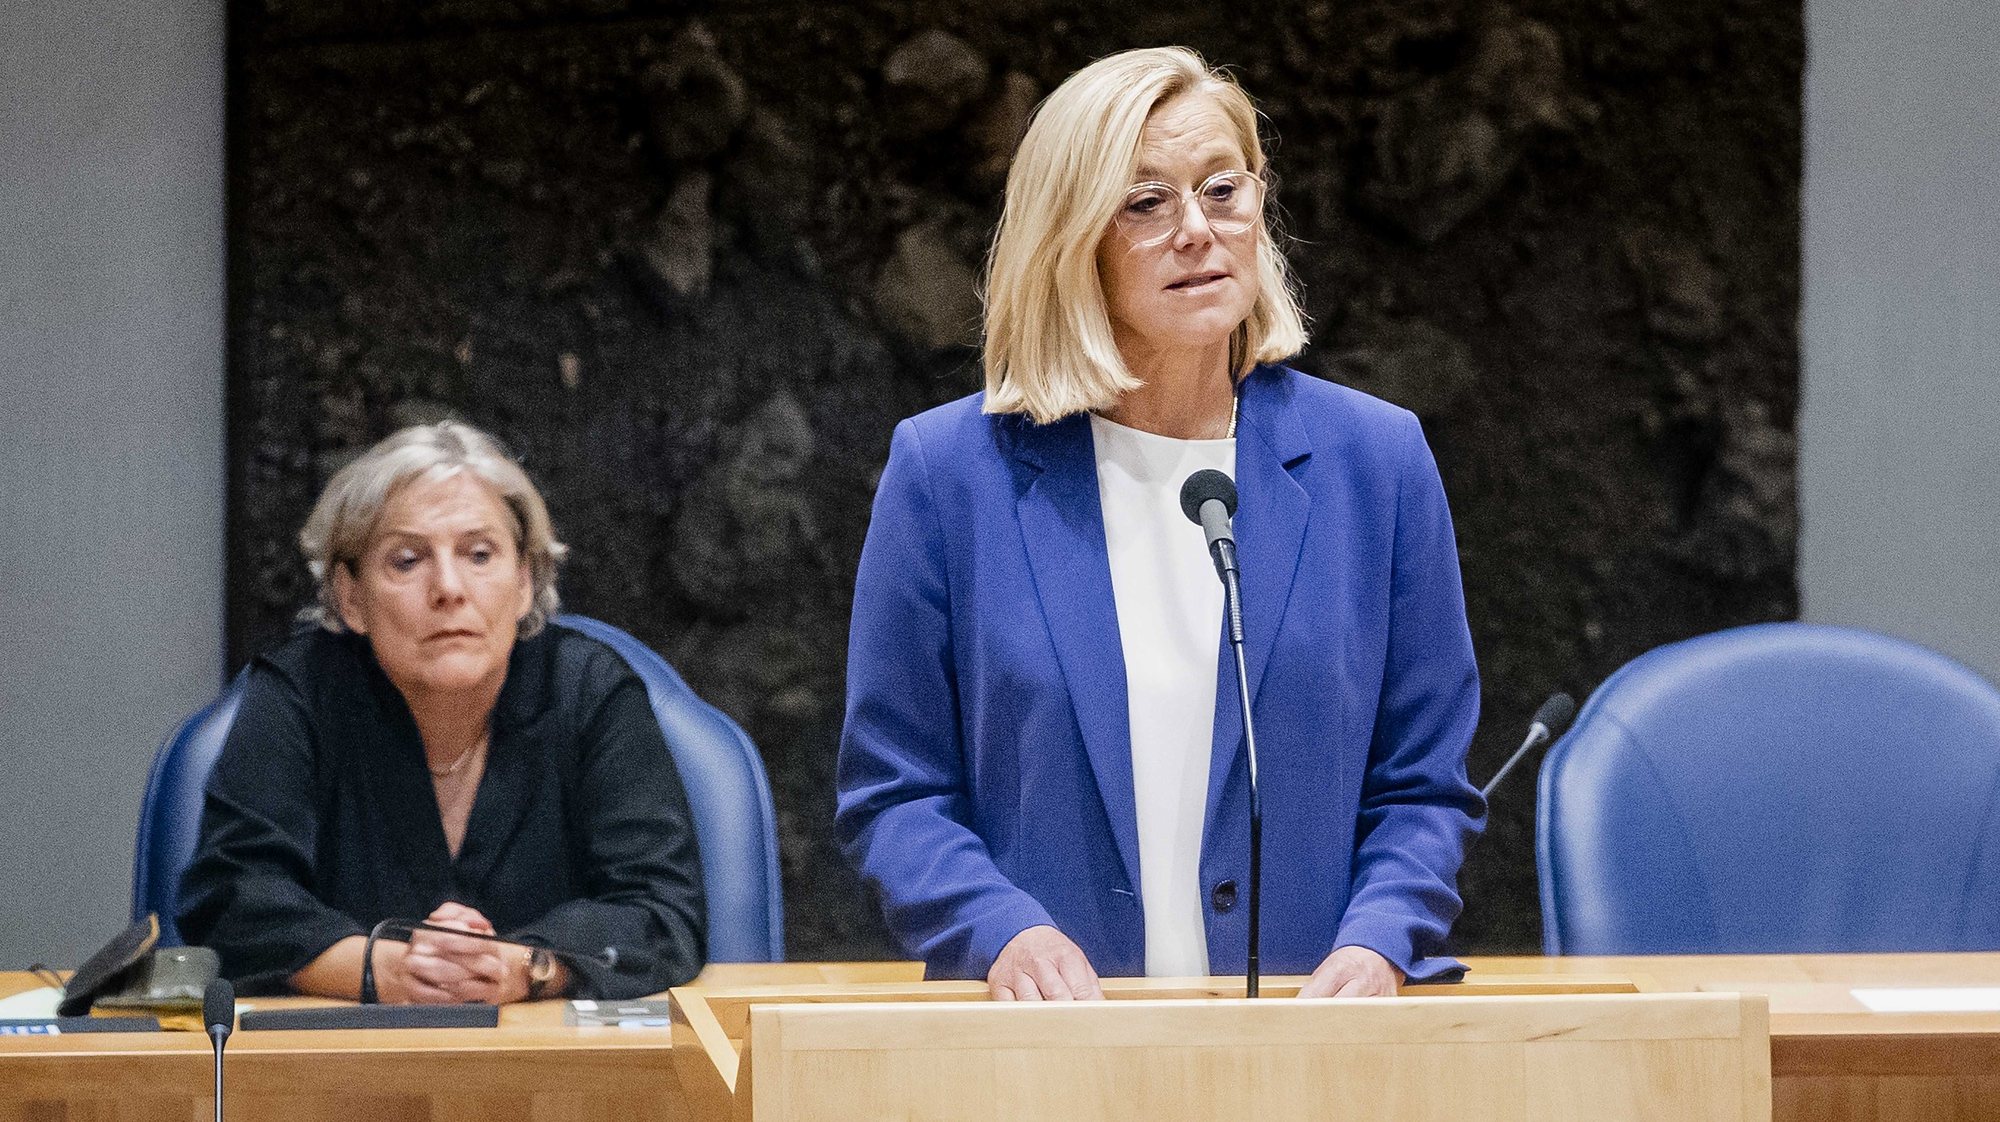 epa09472169 Dutch Foreign Affairs minister Sigrid Kaag, announces her resignation, after MPs voted in favor of a motion of censure against her, in The Hague, Netherlands, 16 September 2021. The House of Representatives submitted a motion of censure against Kaag because of the chaotic evacuation from Afghanistan.  EPA/Sem van der Wal